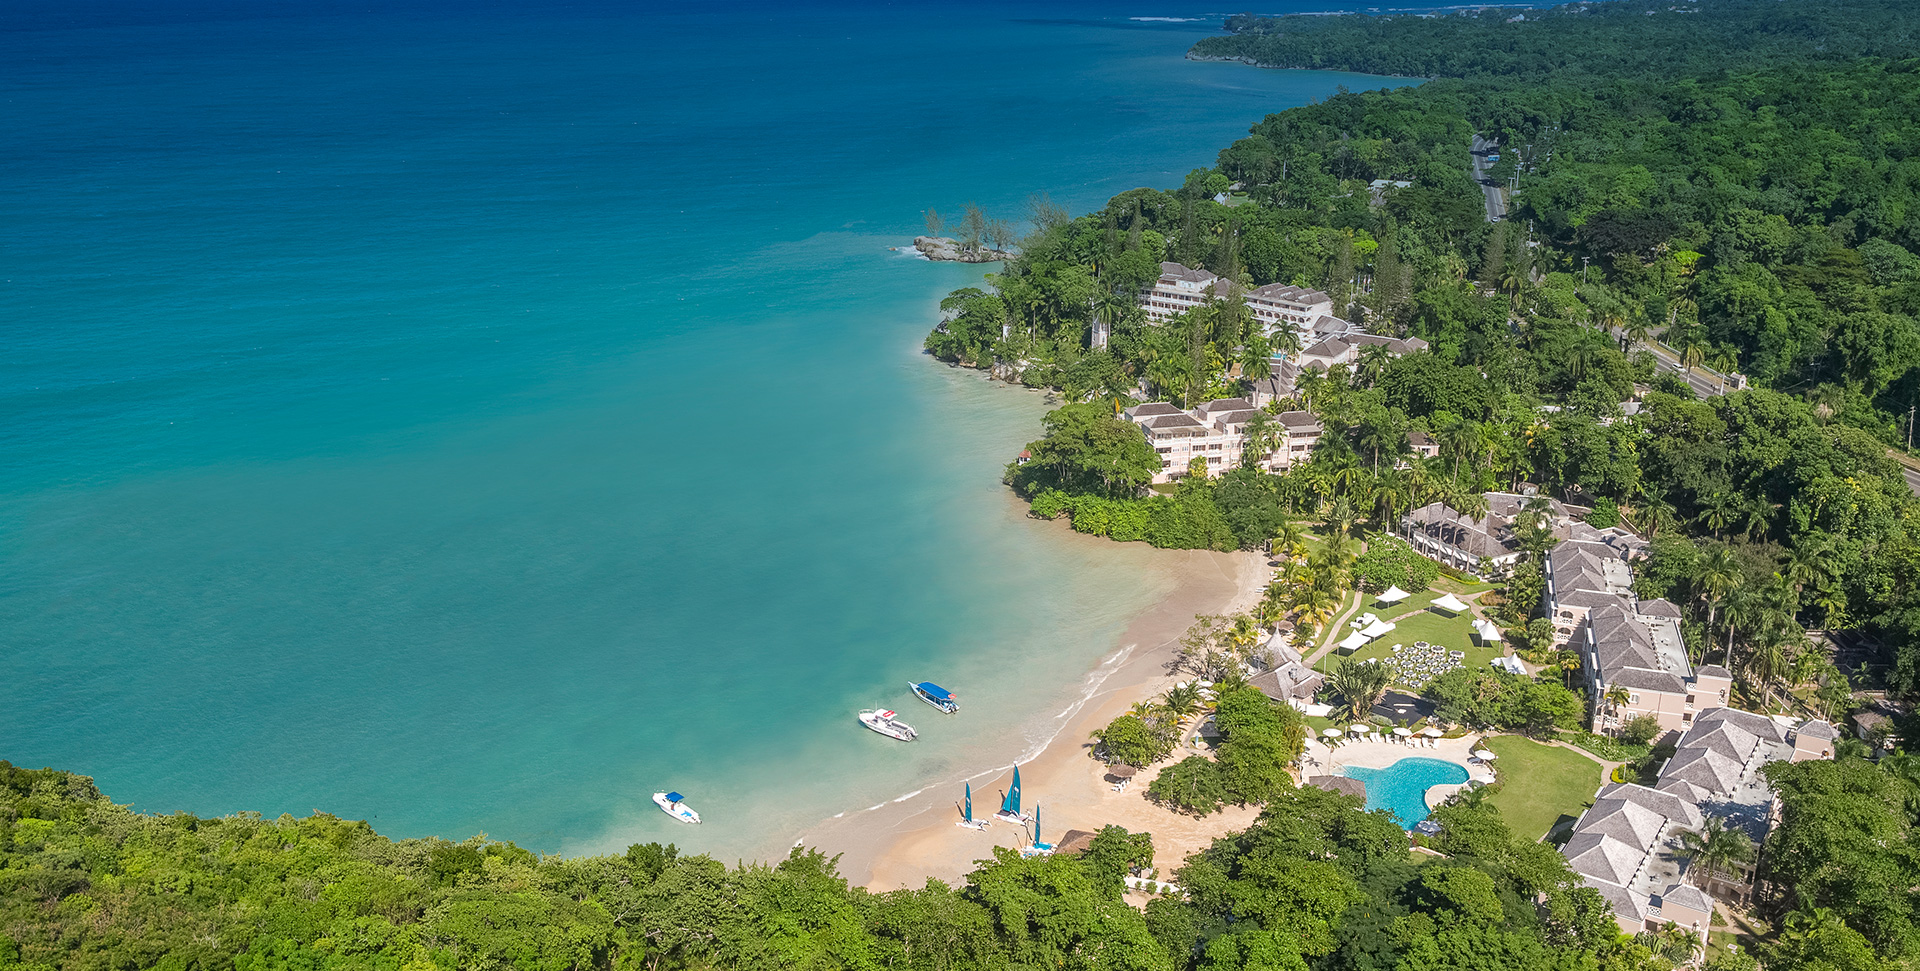 13 Adult only Resorts in Jamaica - Prude to Nude! - Stayopedia